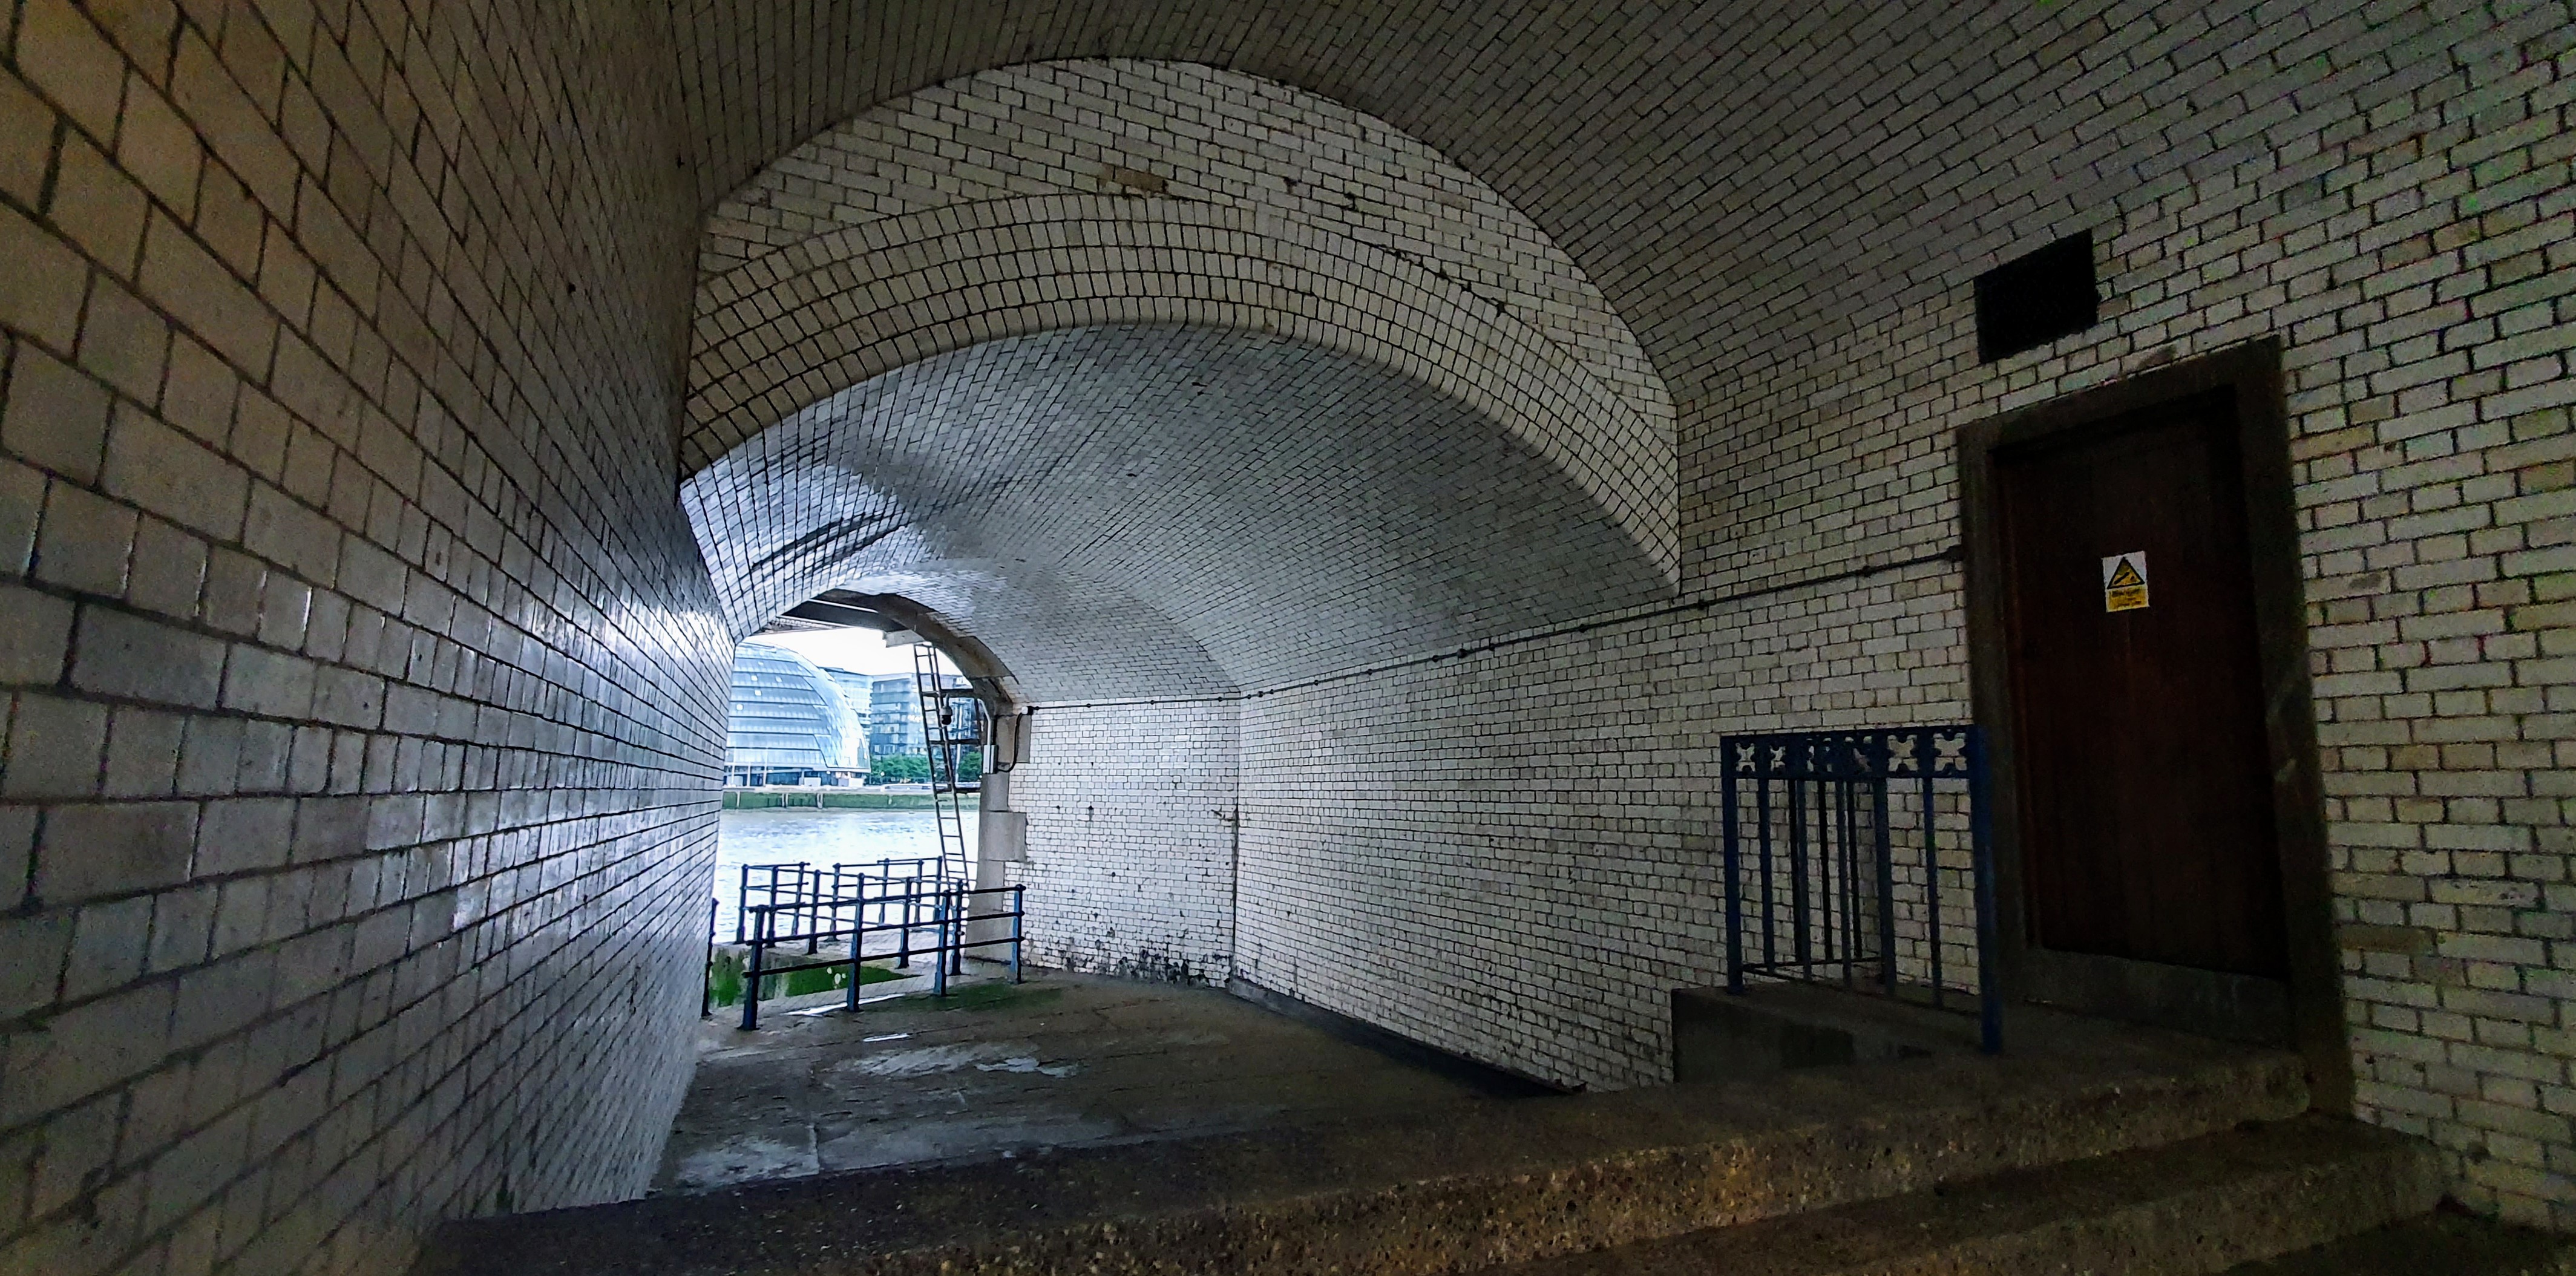 Tiled former mortuary alcove beneath the north tower of Tower Bridge, known as Dead Man's Hole